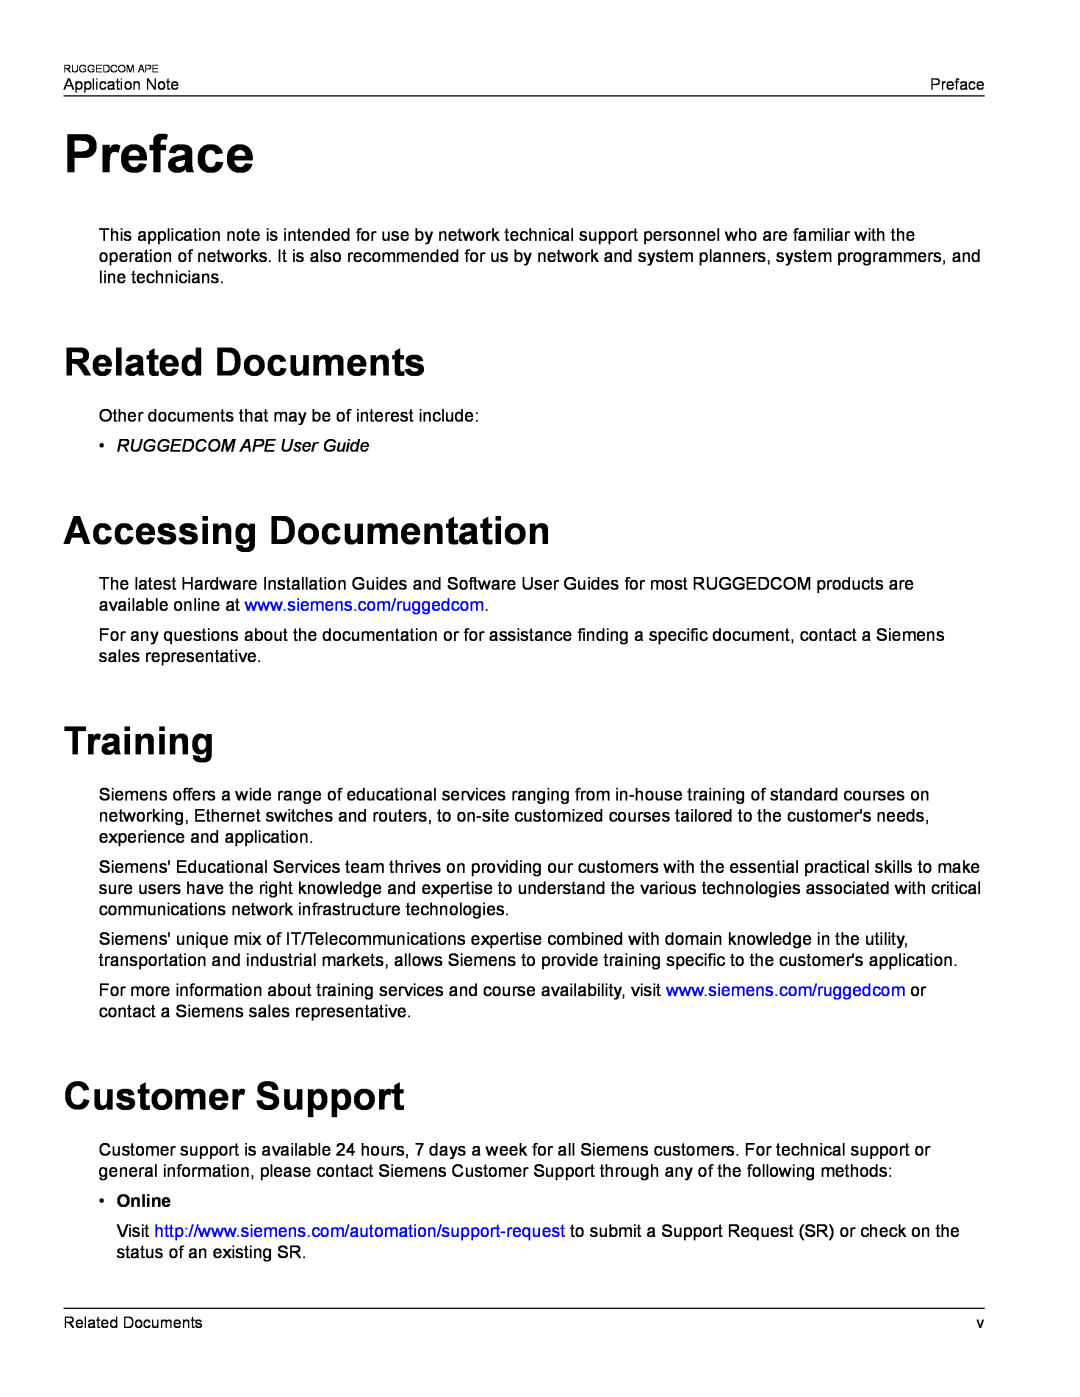 Siemens AN25 Preface, Related Documents, Accessing Documentation, Training, Customer Support, RUGGEDCOM APE User Guide 